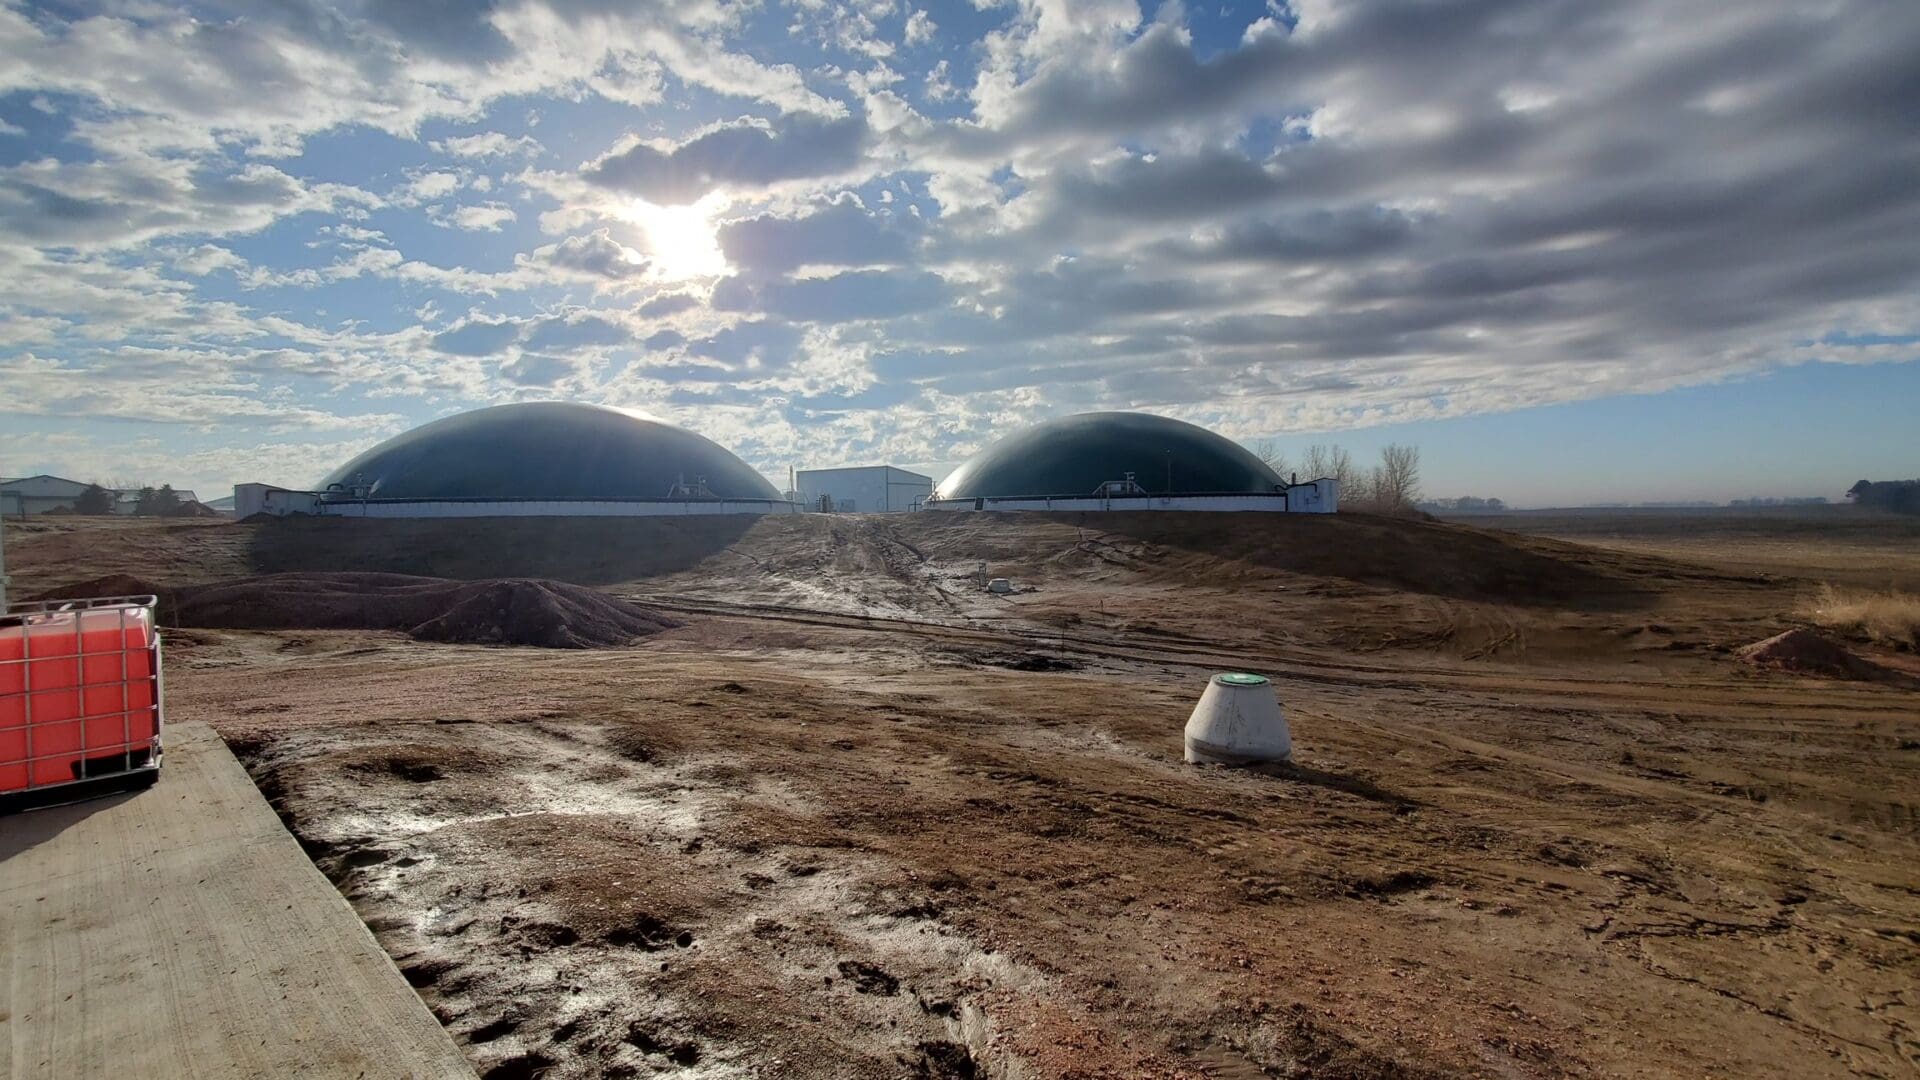 A view of some domes in the desert.